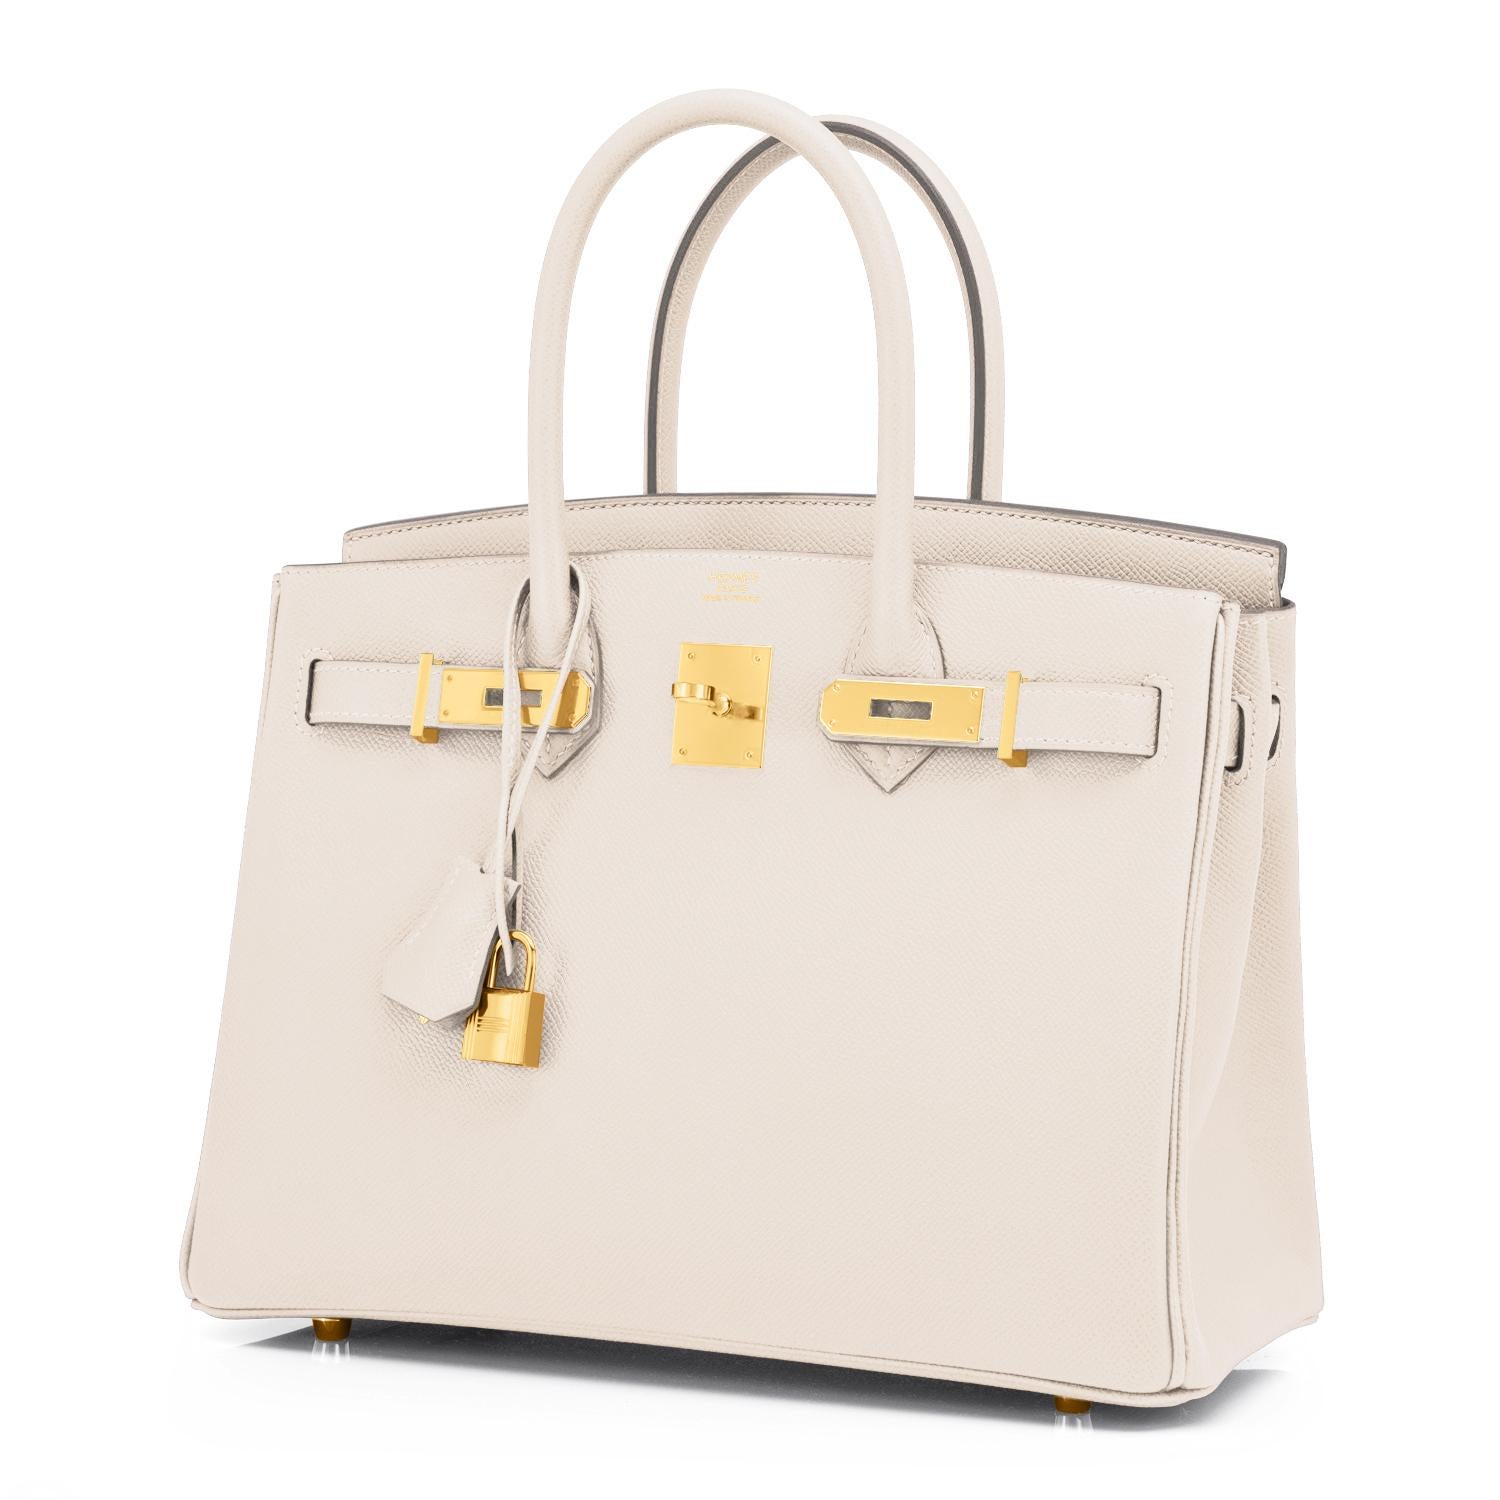 Hermes Birkin 30cm Craie Off White Epsom Gold Hardware Z Stamp, 2021
Brand New in Box. Store Fresh. Pristine Condition (with plastic on hardware)
The hottest color of 2021!
Perfect gift! Comes in full set with lock, keys, clochette, sleeper,